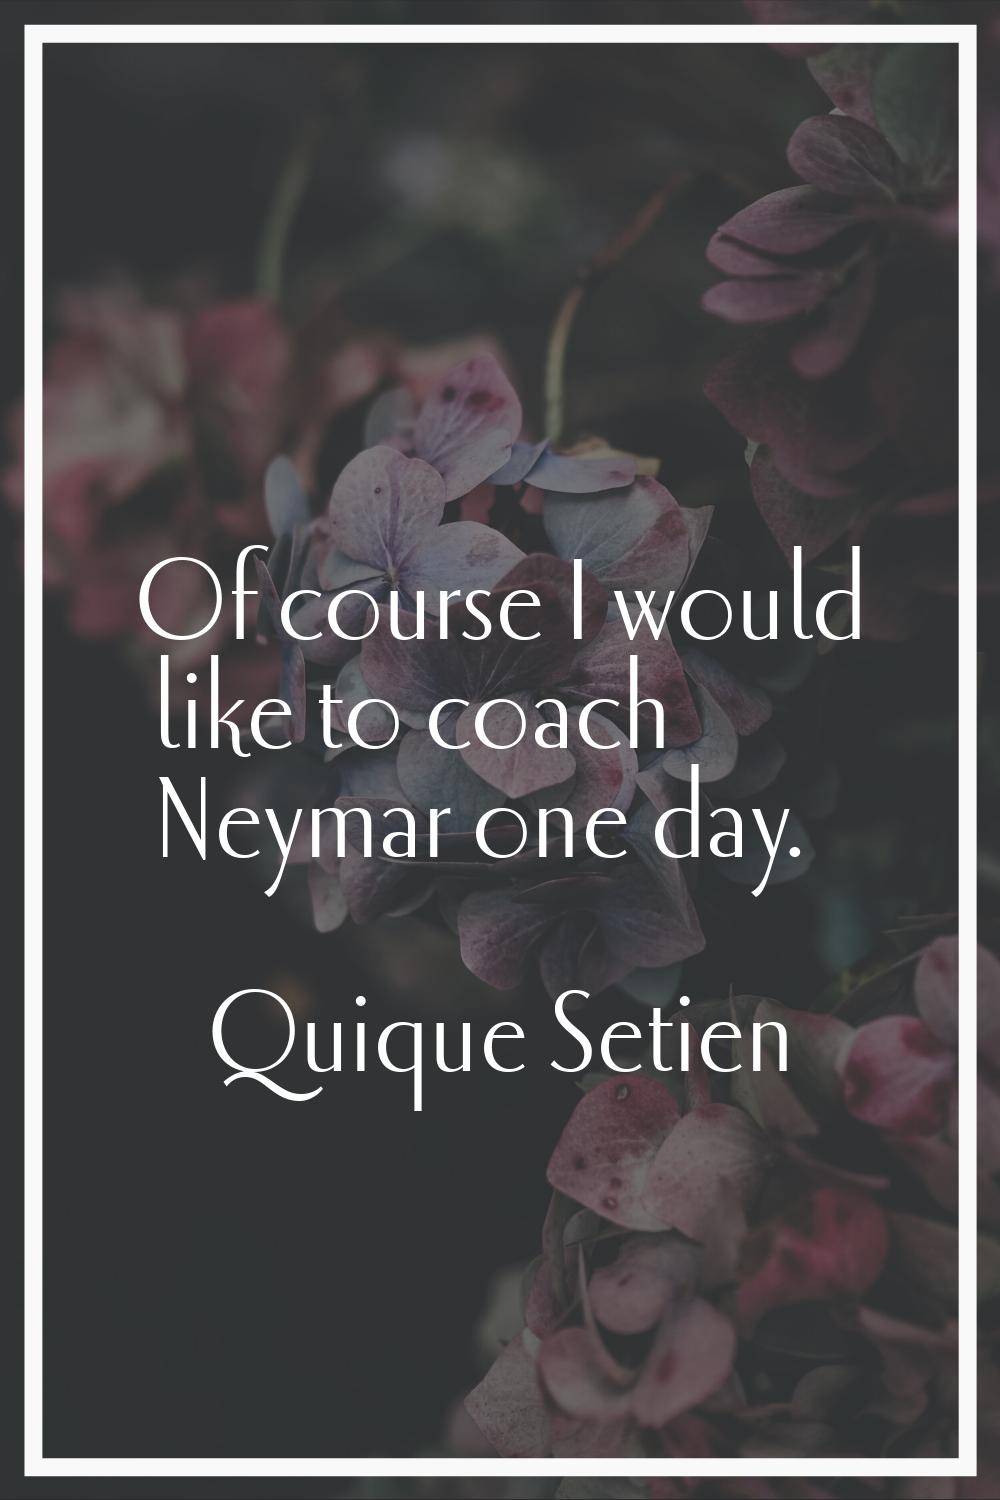 Of course I would like to coach Neymar one day.